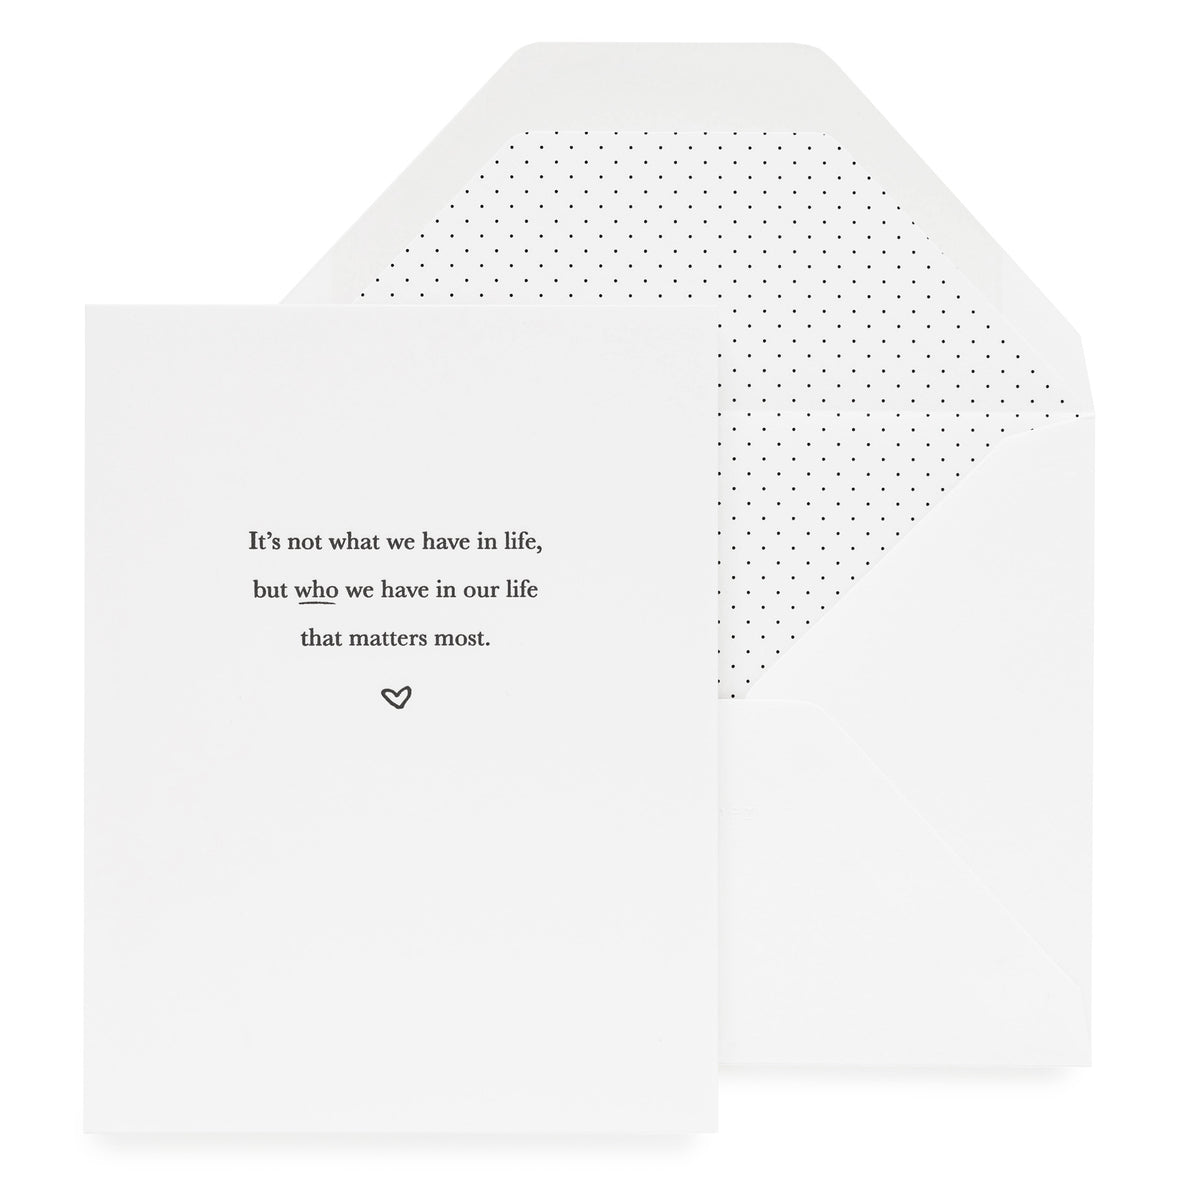 White Folded Card printed with "It's not what we have in life but who we have in our life that matters most."